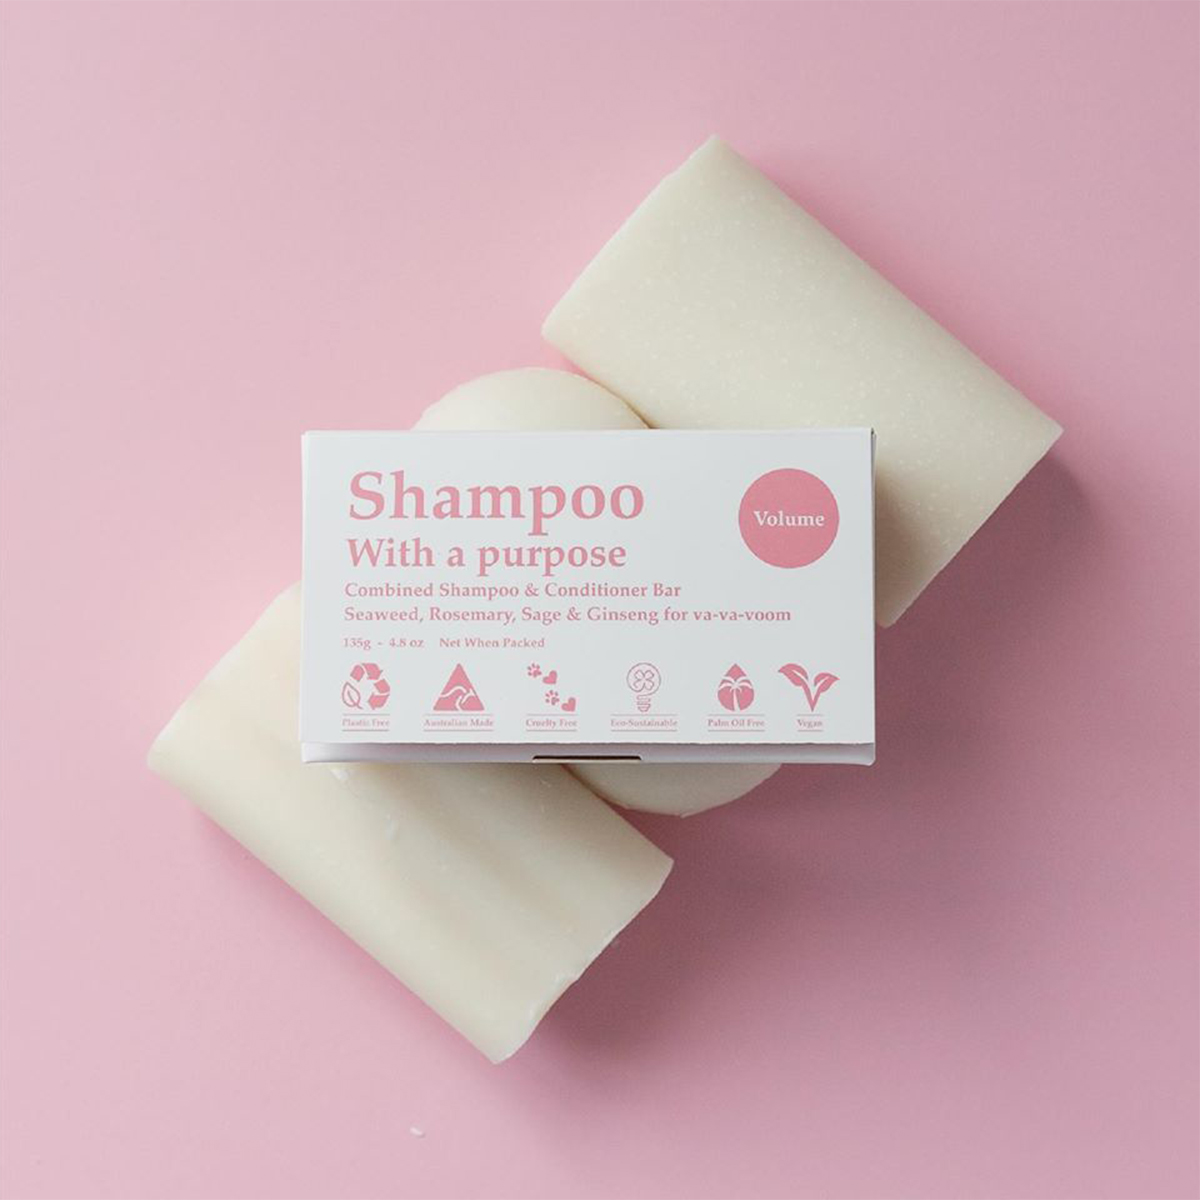 three shampoo bars lined up on a pink background with a box on top.